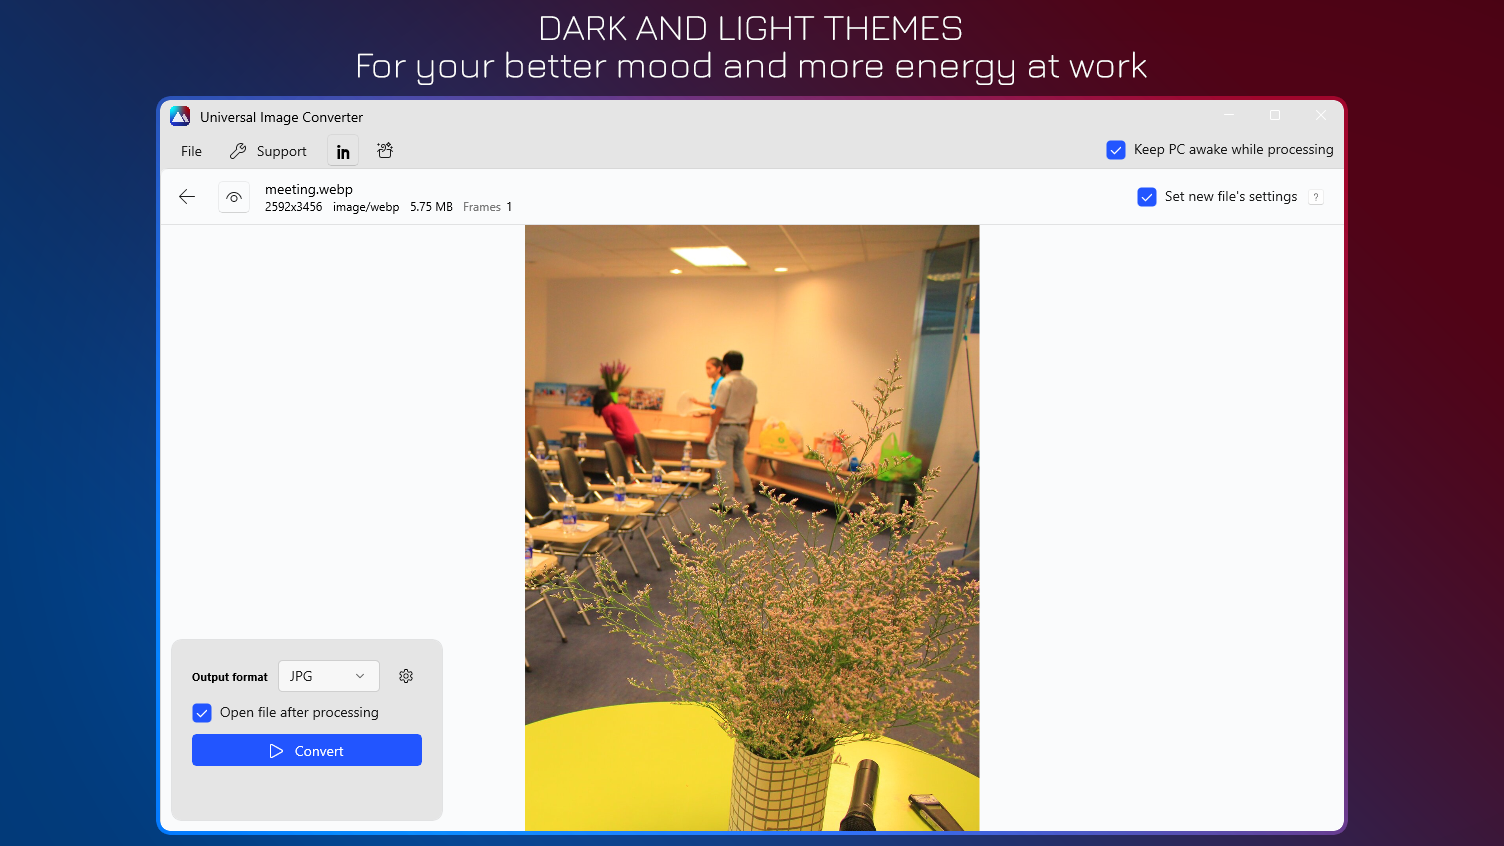 Dark And Light Themes - For your better mood and more energy at work